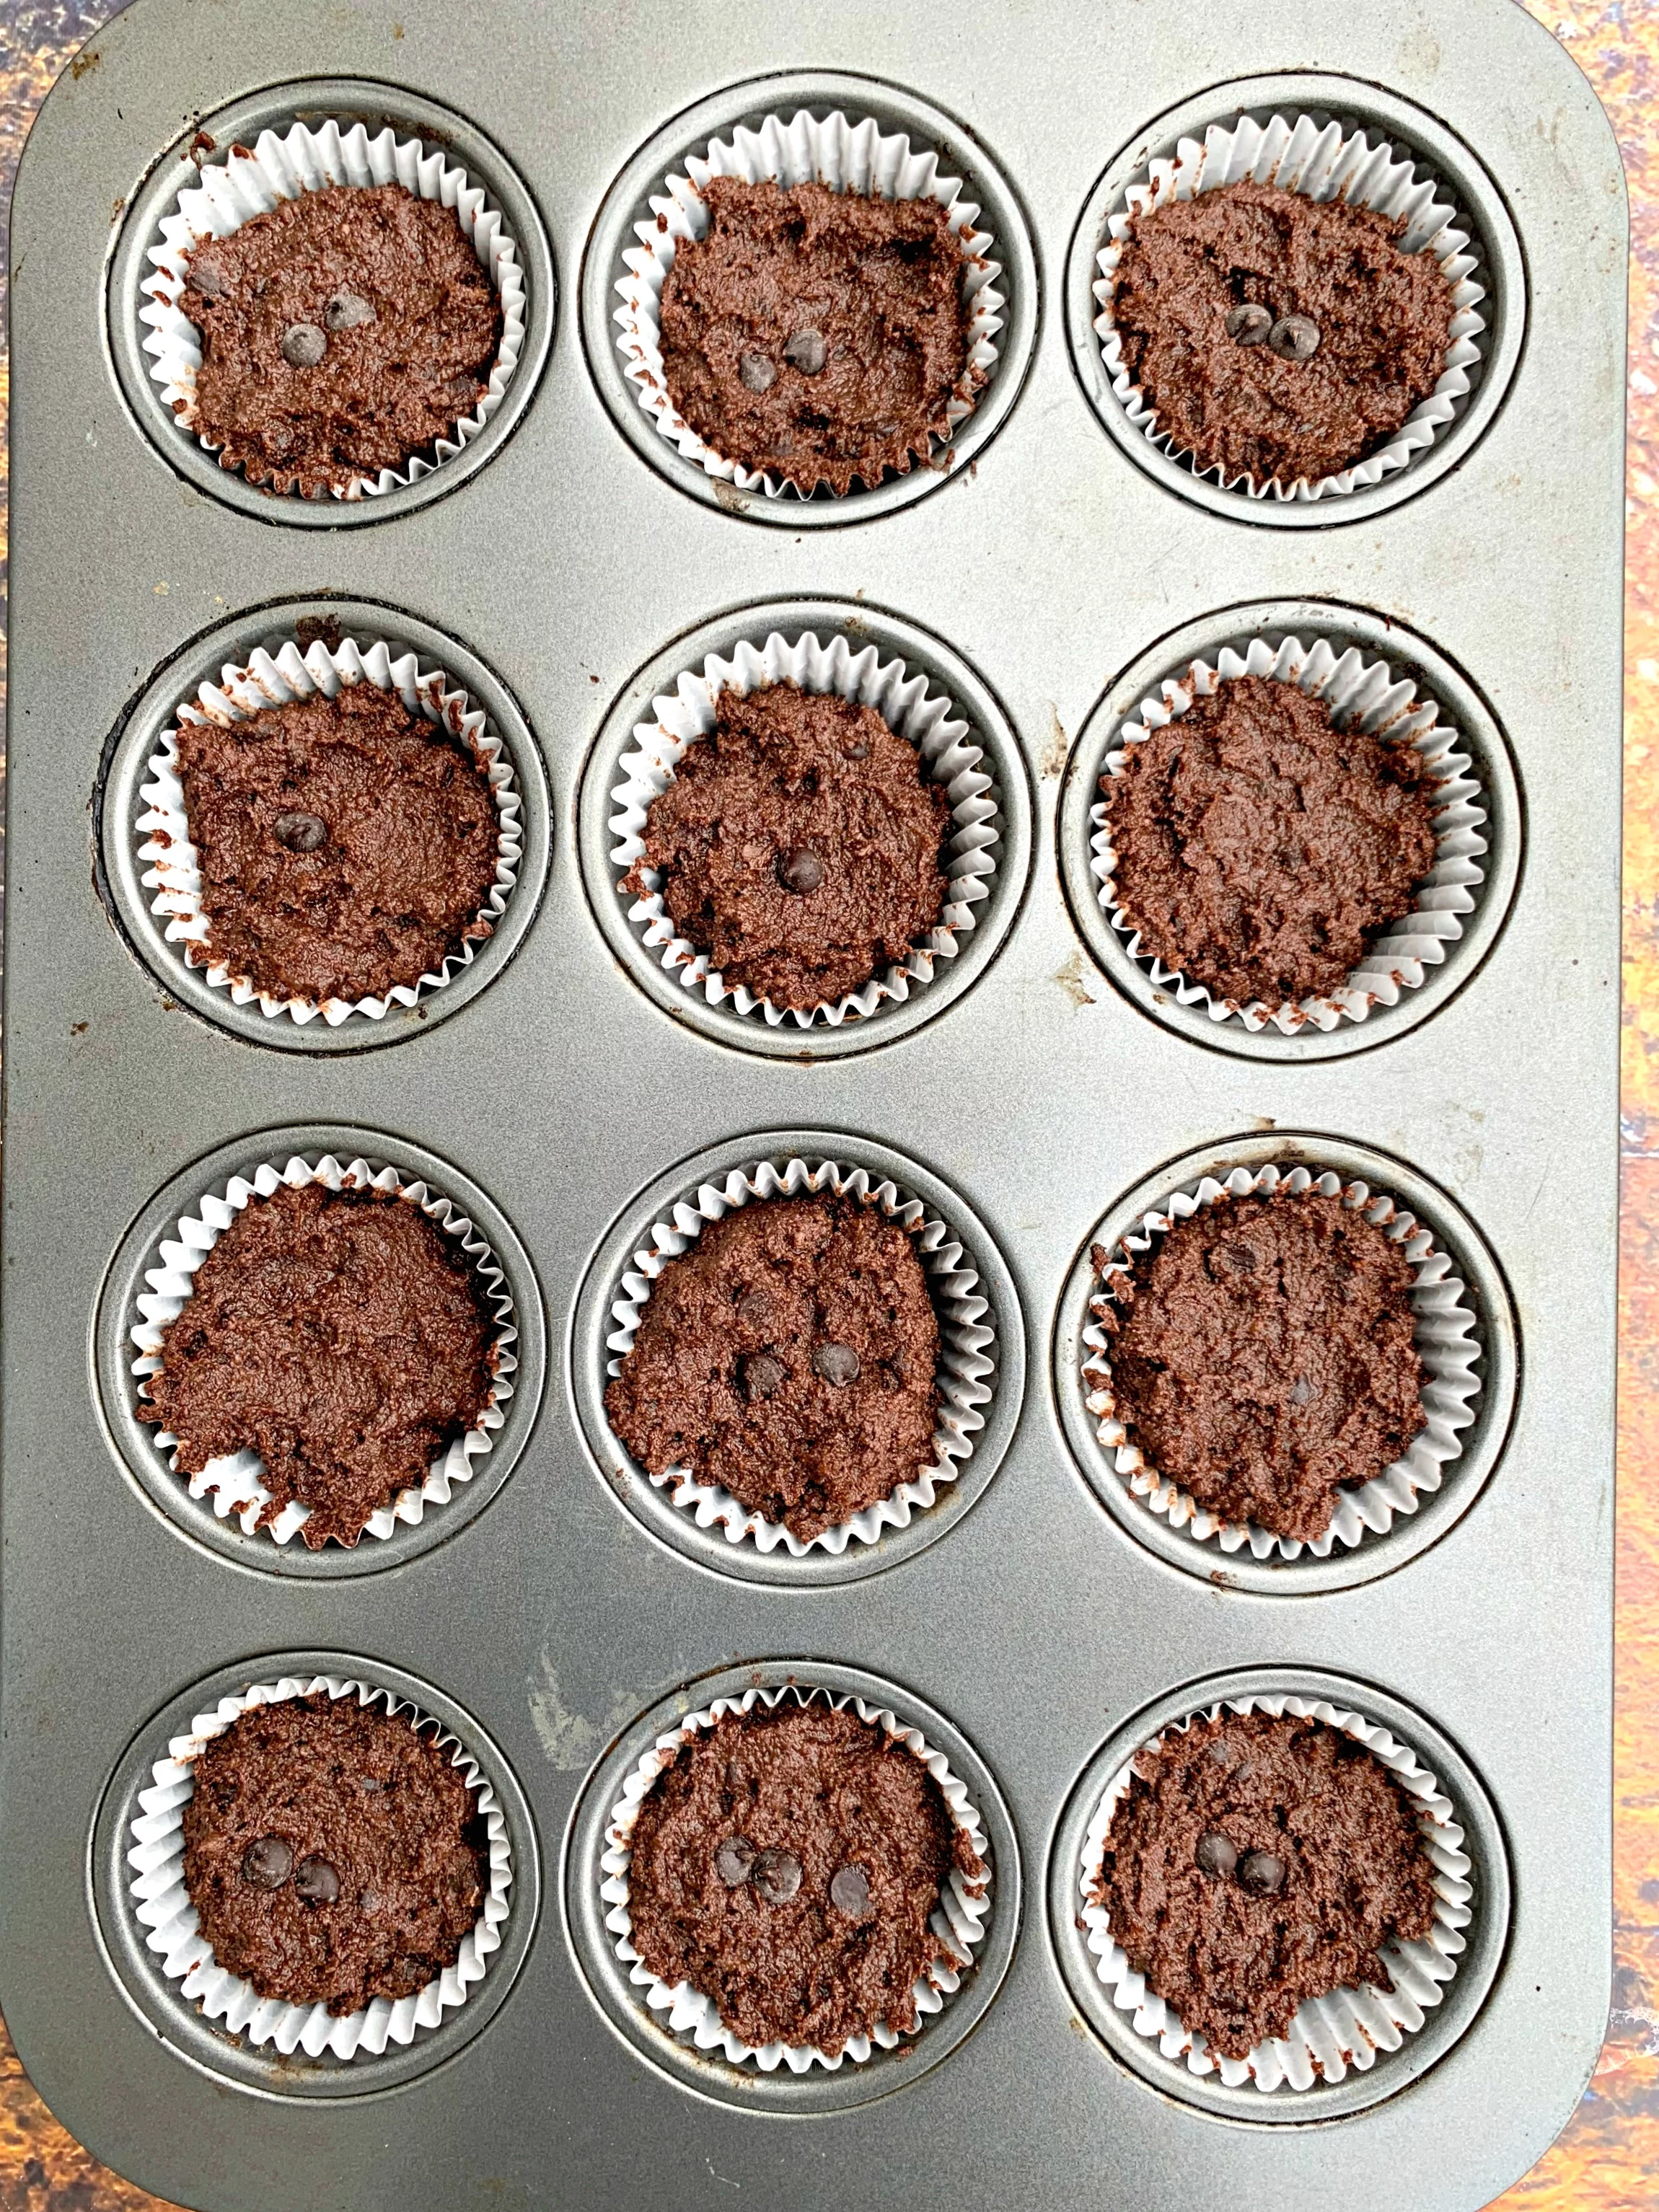 uncooked keto low carb chocolate muffins in a muffin tin